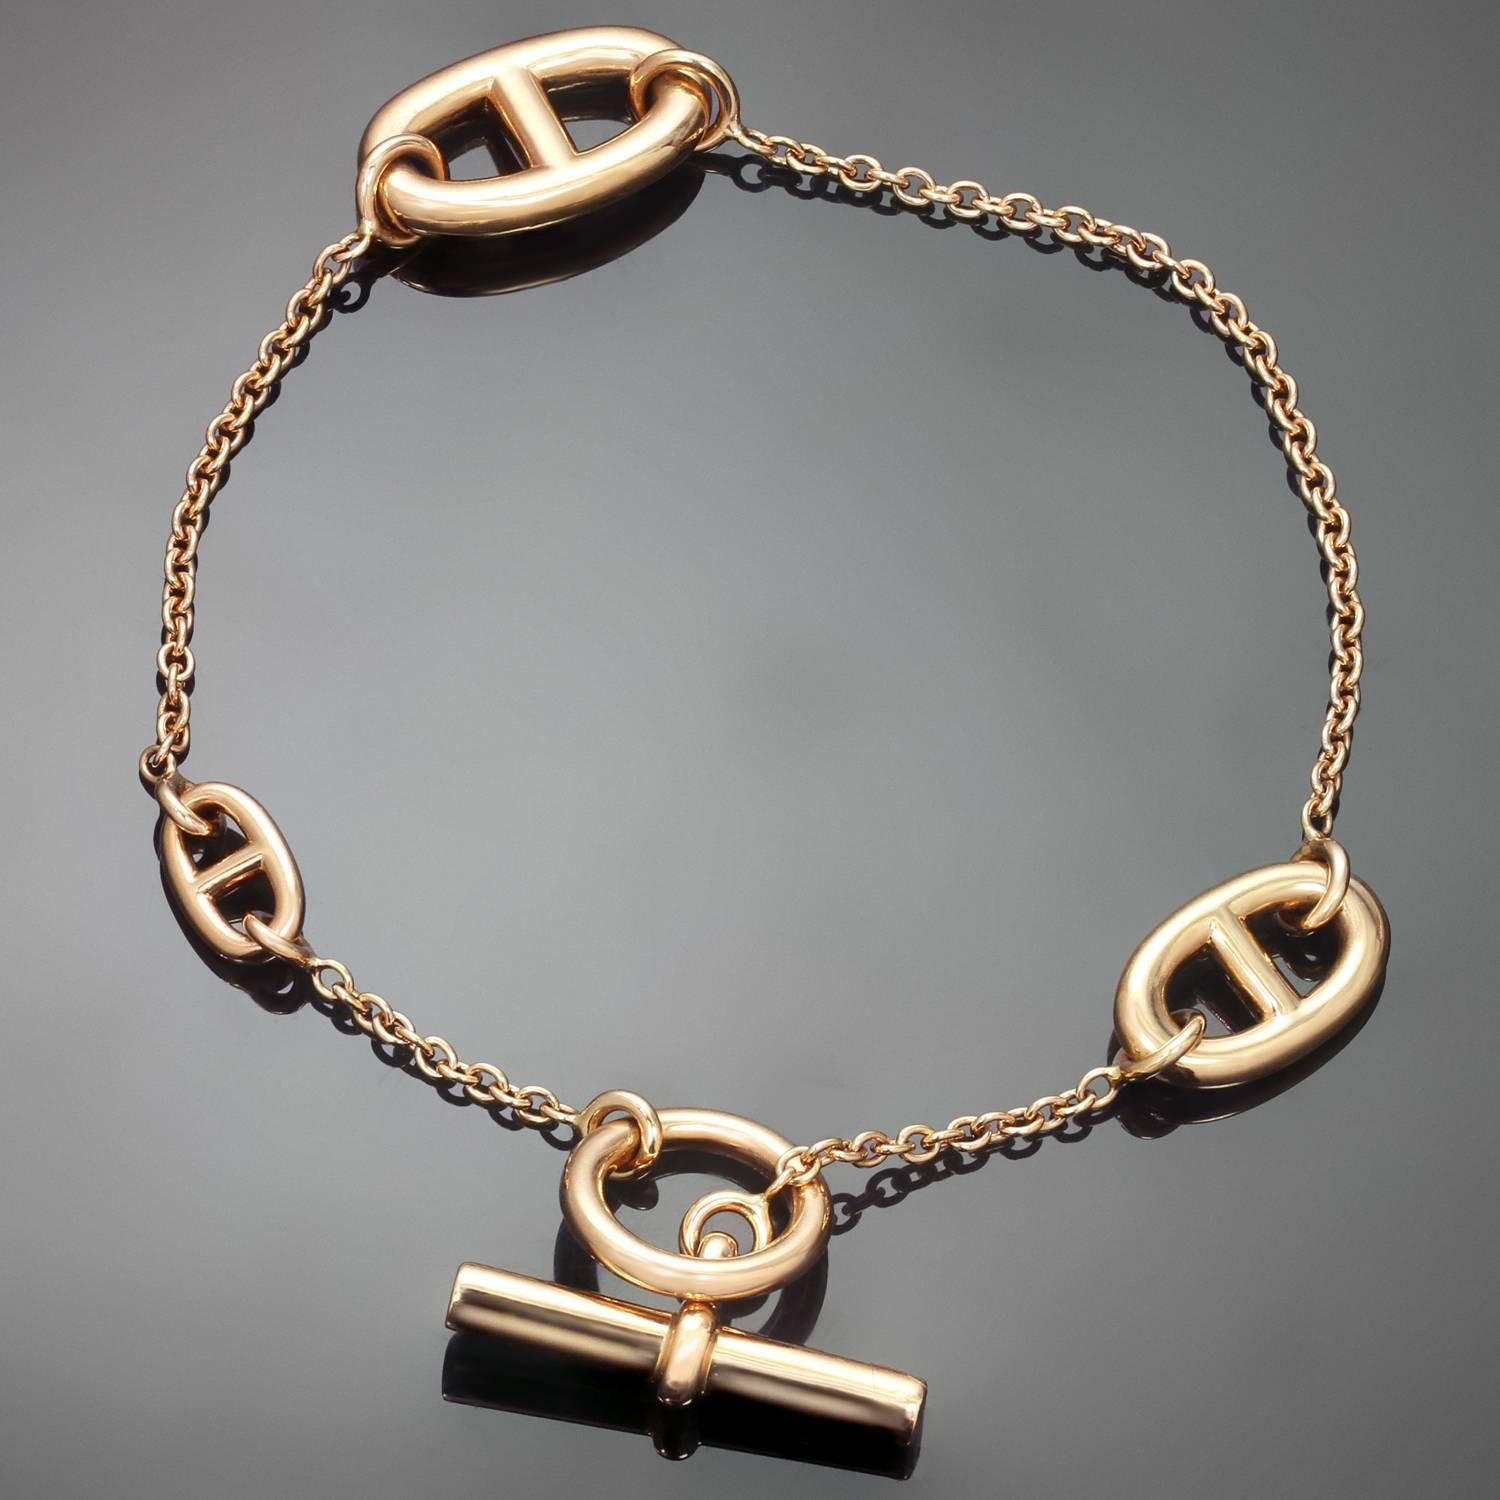 This chic Hermes bracelet from the Farandole collection features a chain and oval link design crafted in 18k rose gold and completed with a toggle closure. Made in France circa 2010s. . 